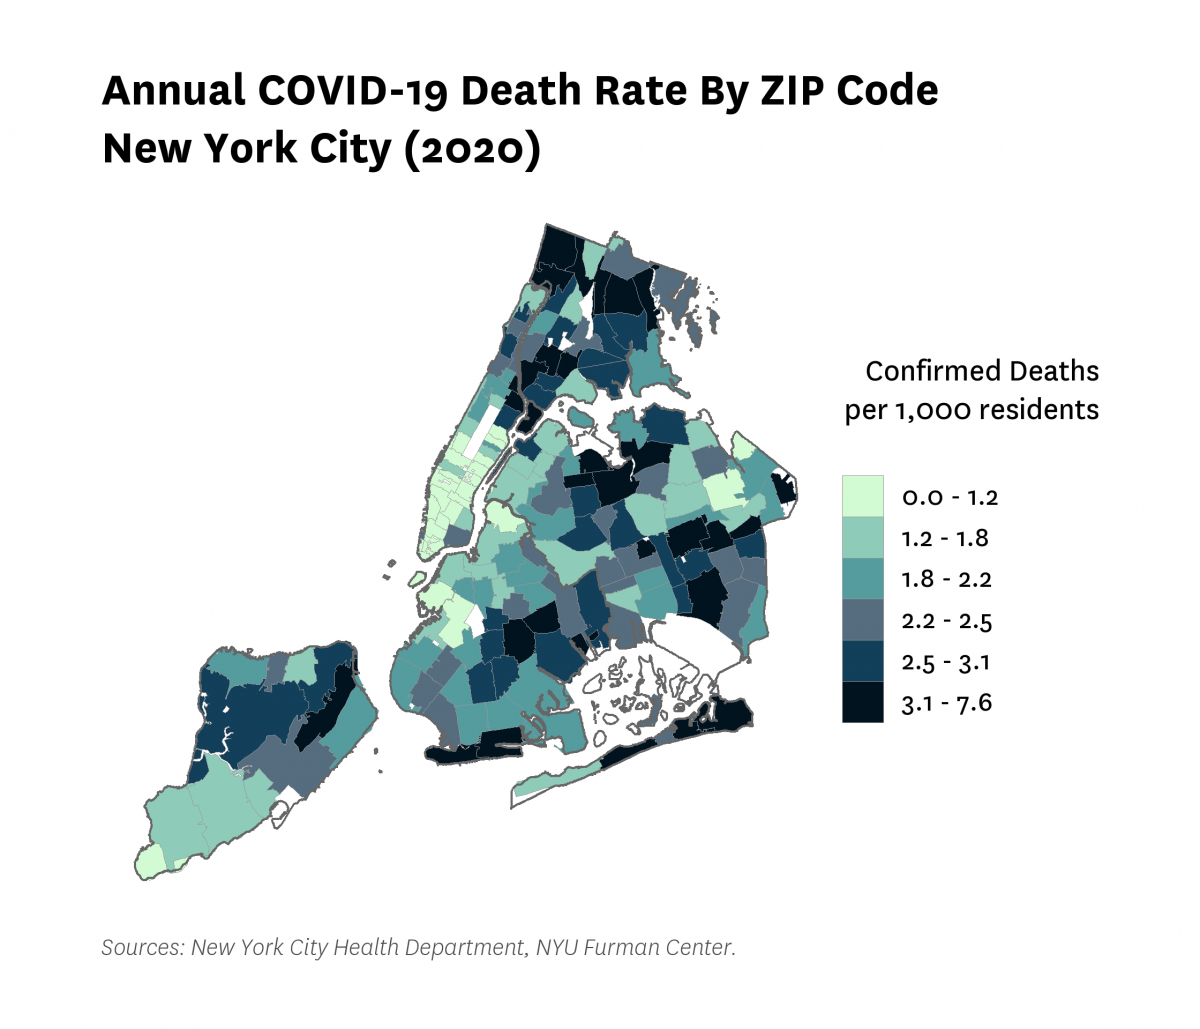 Map of confirmed COVID-19 deaths per 1,000 residents in 2020 by zip code in New York City.